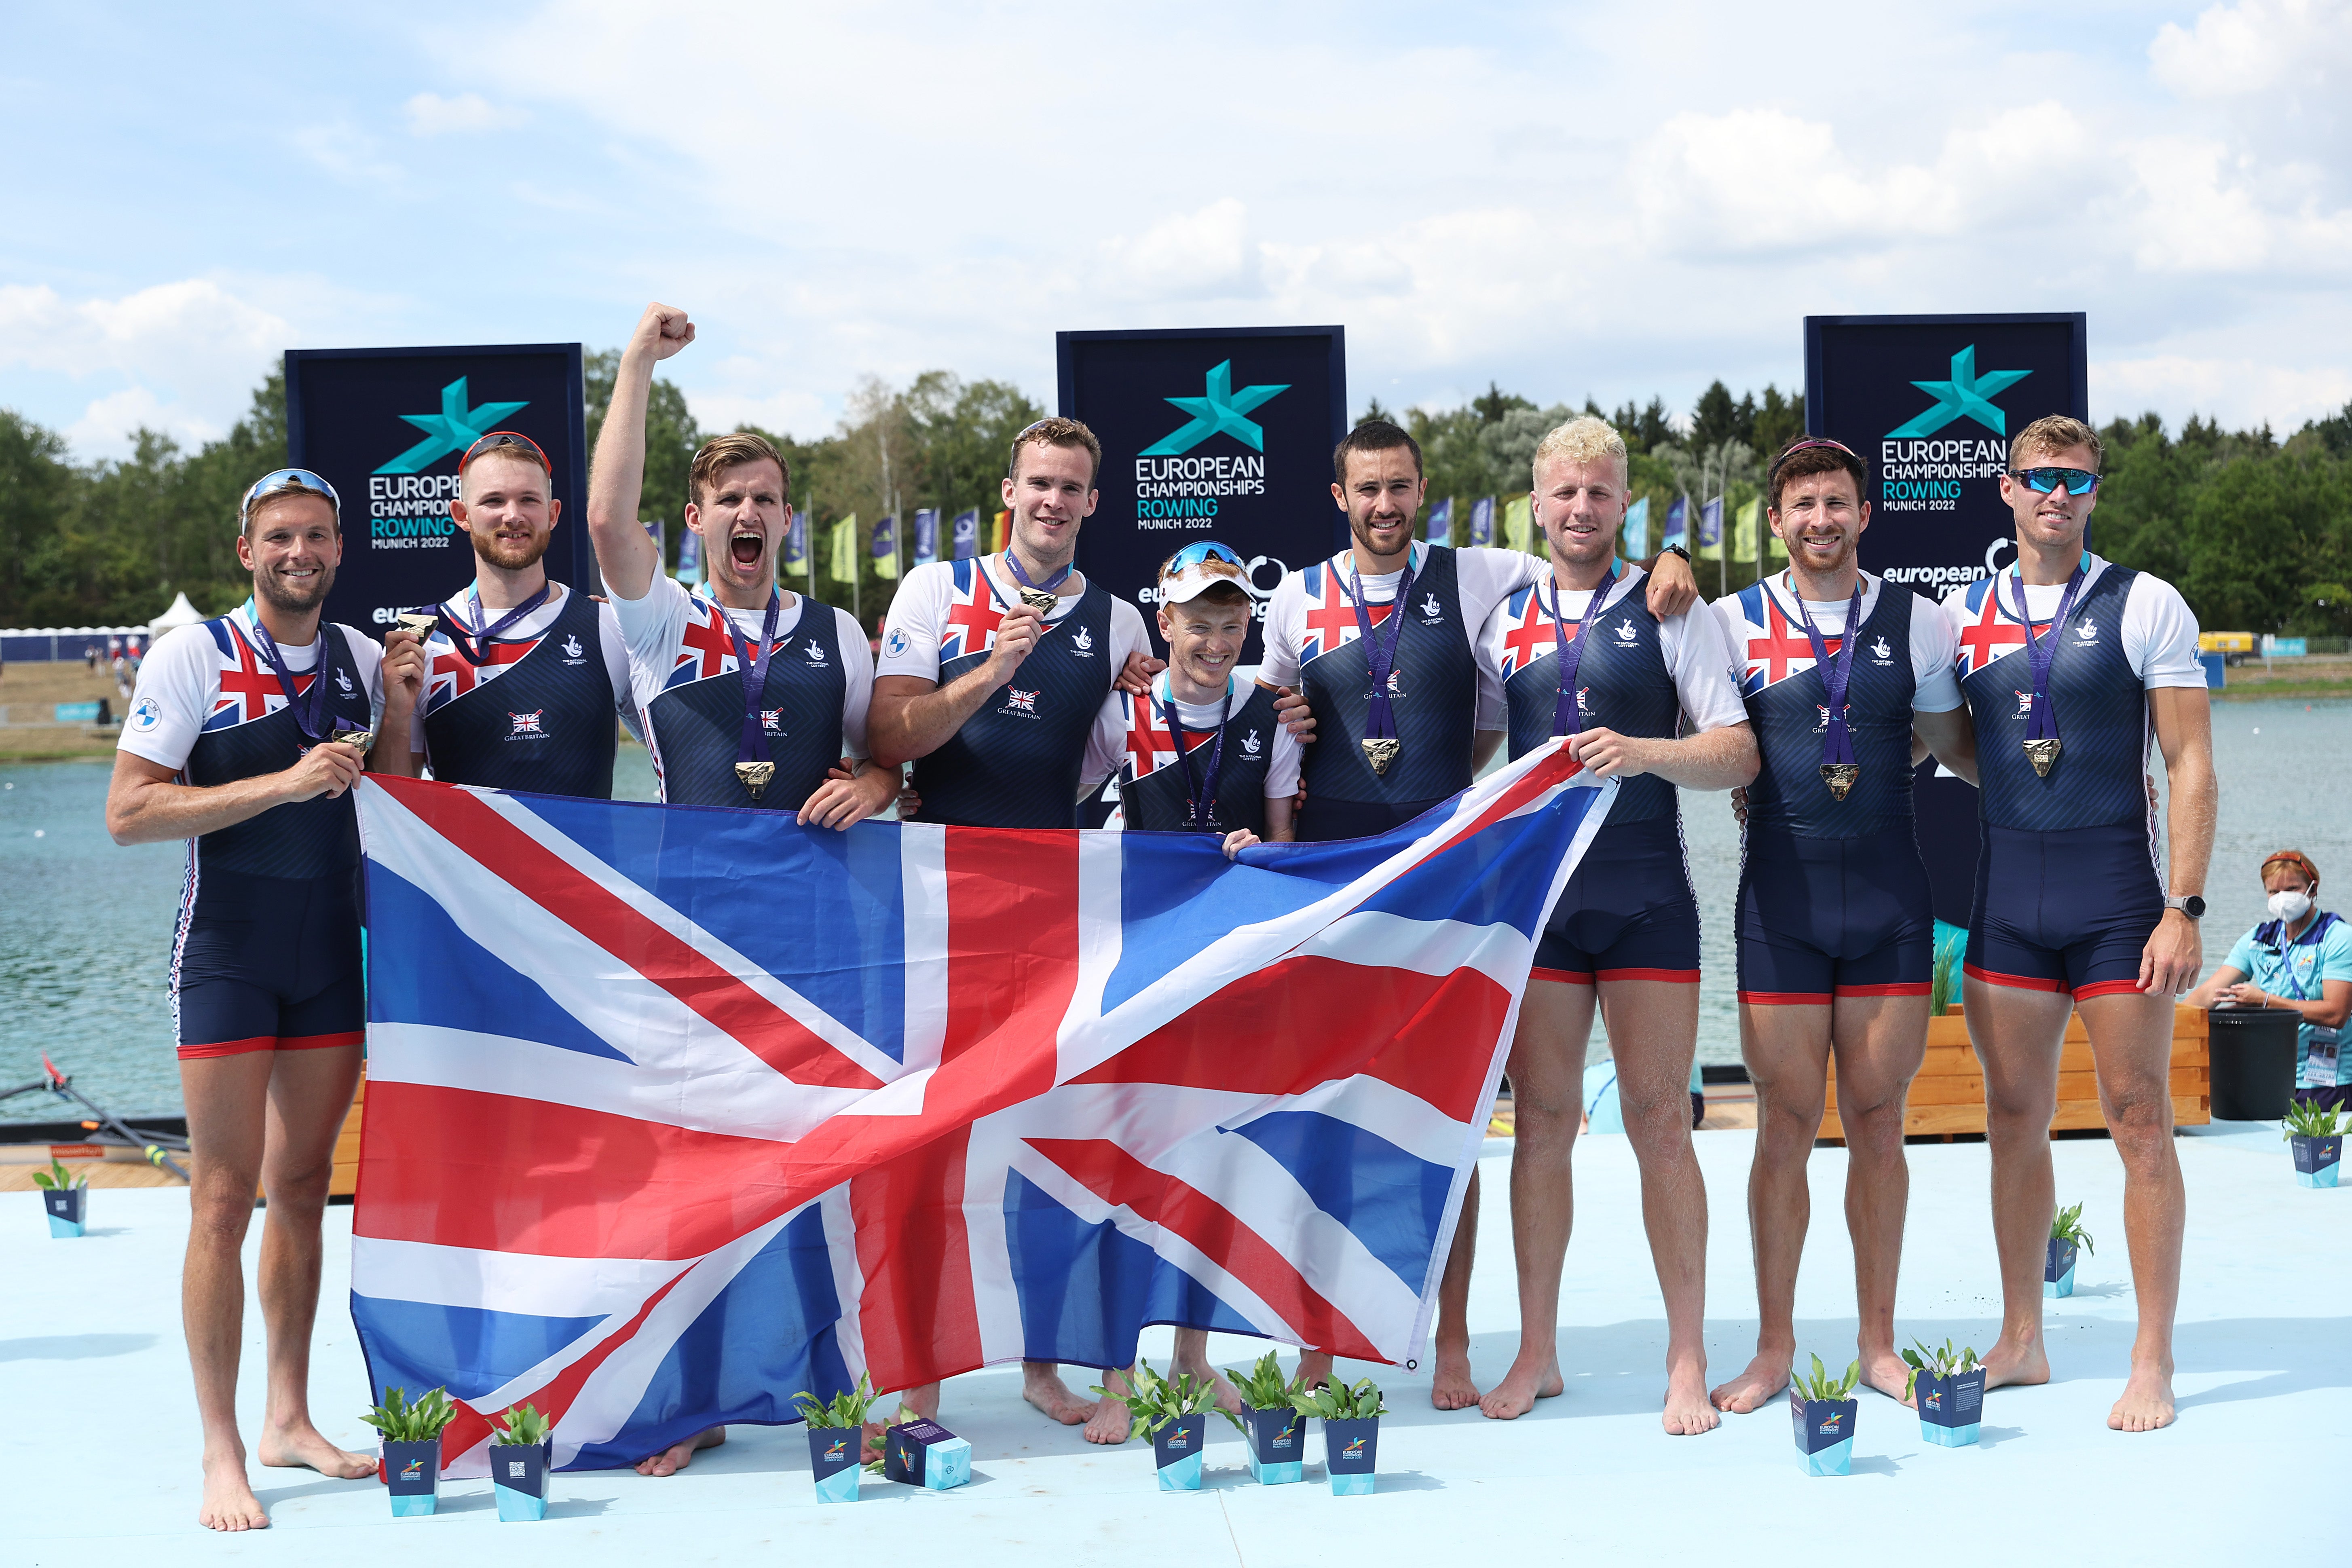 British boats have enjoyed consistent success during this Olympic cycle